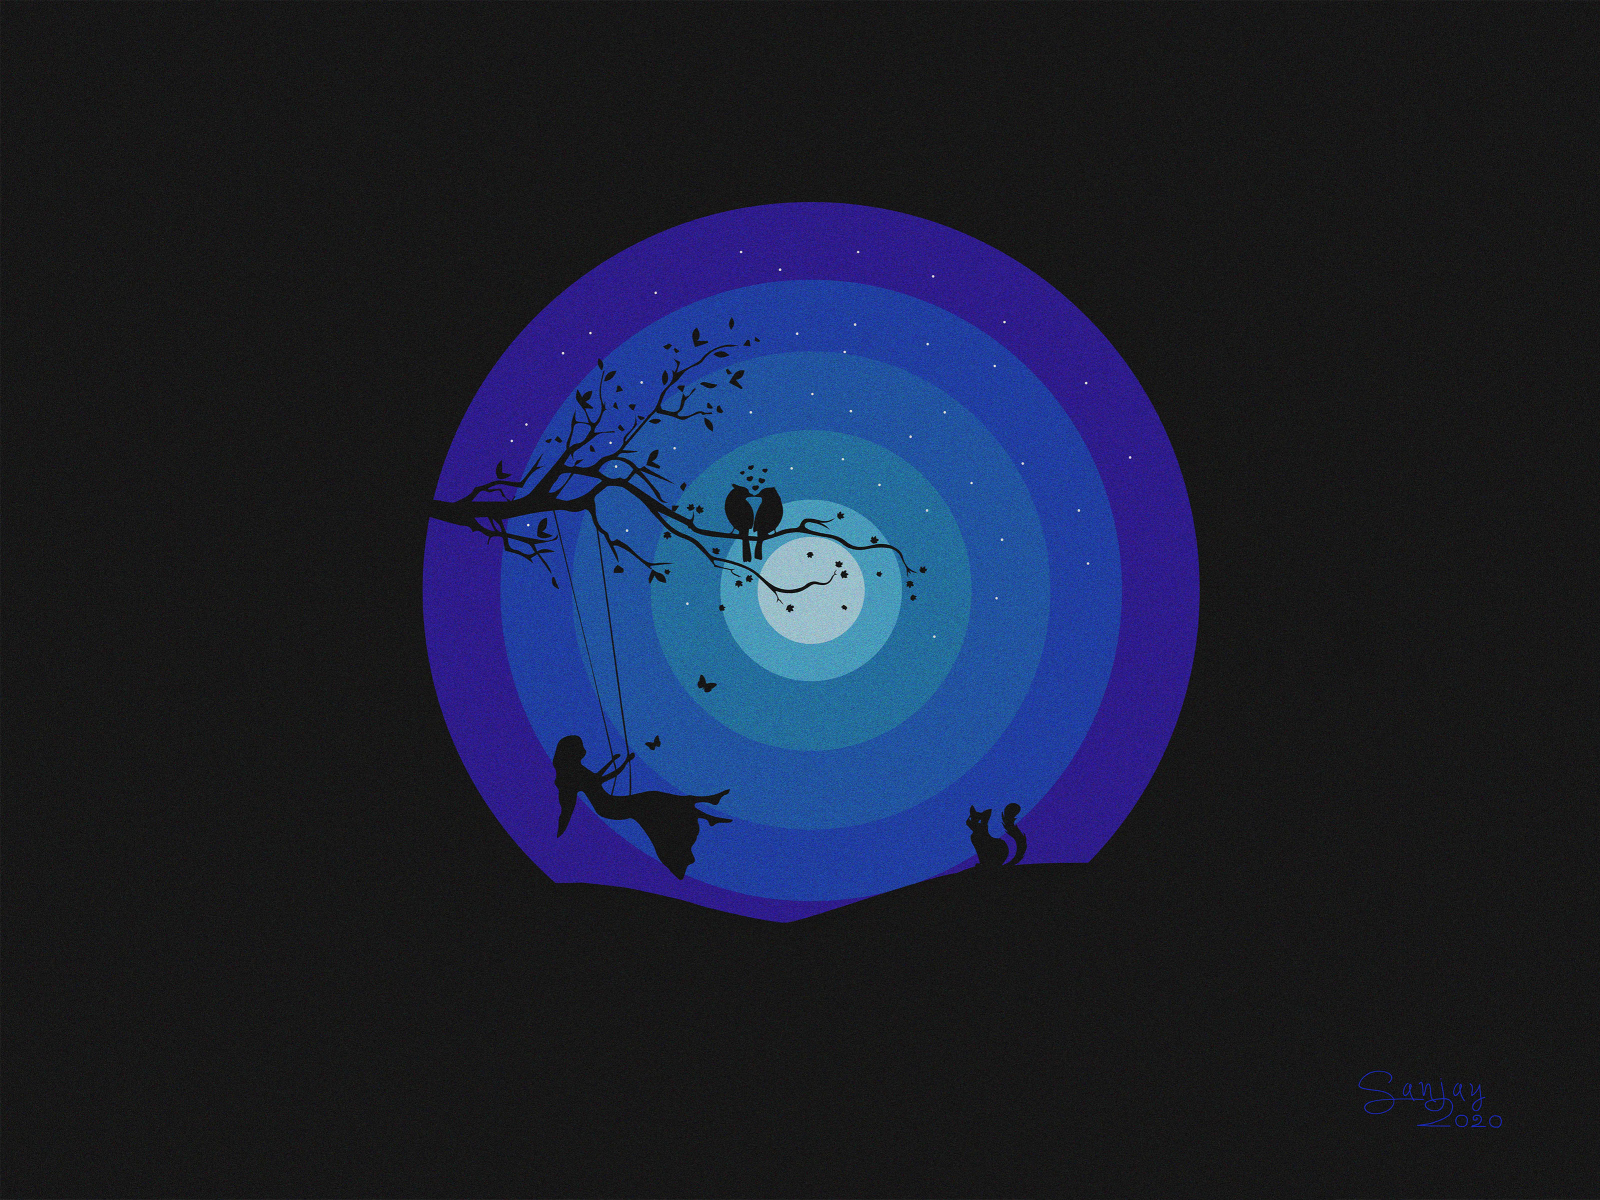 Dreaming night by Sanjay on Dribbble